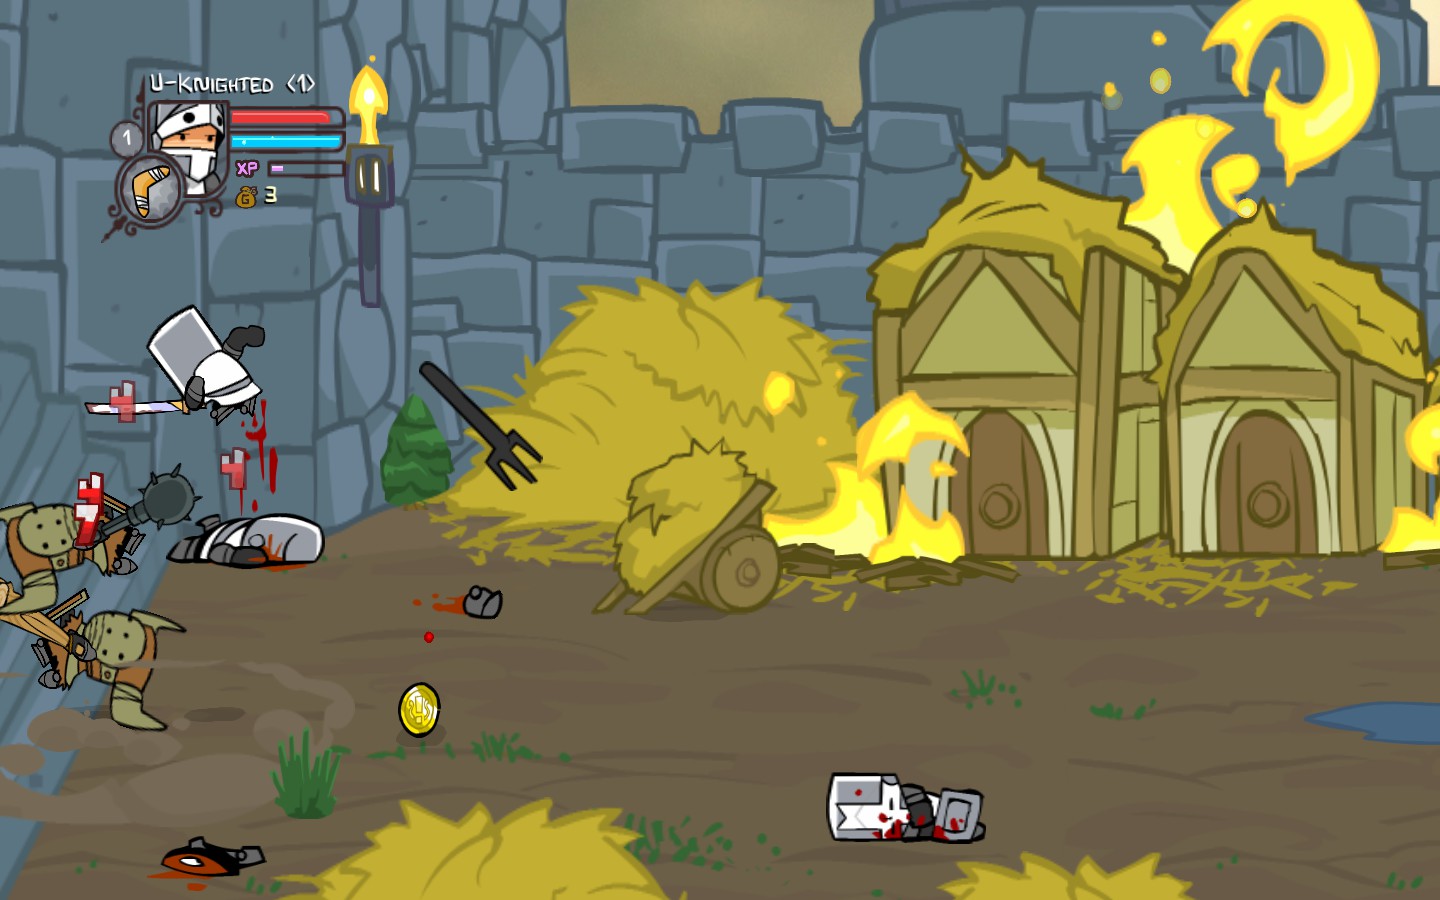 ayy! Just like Castle Crashers! - #137848270 added by Zaxplab at